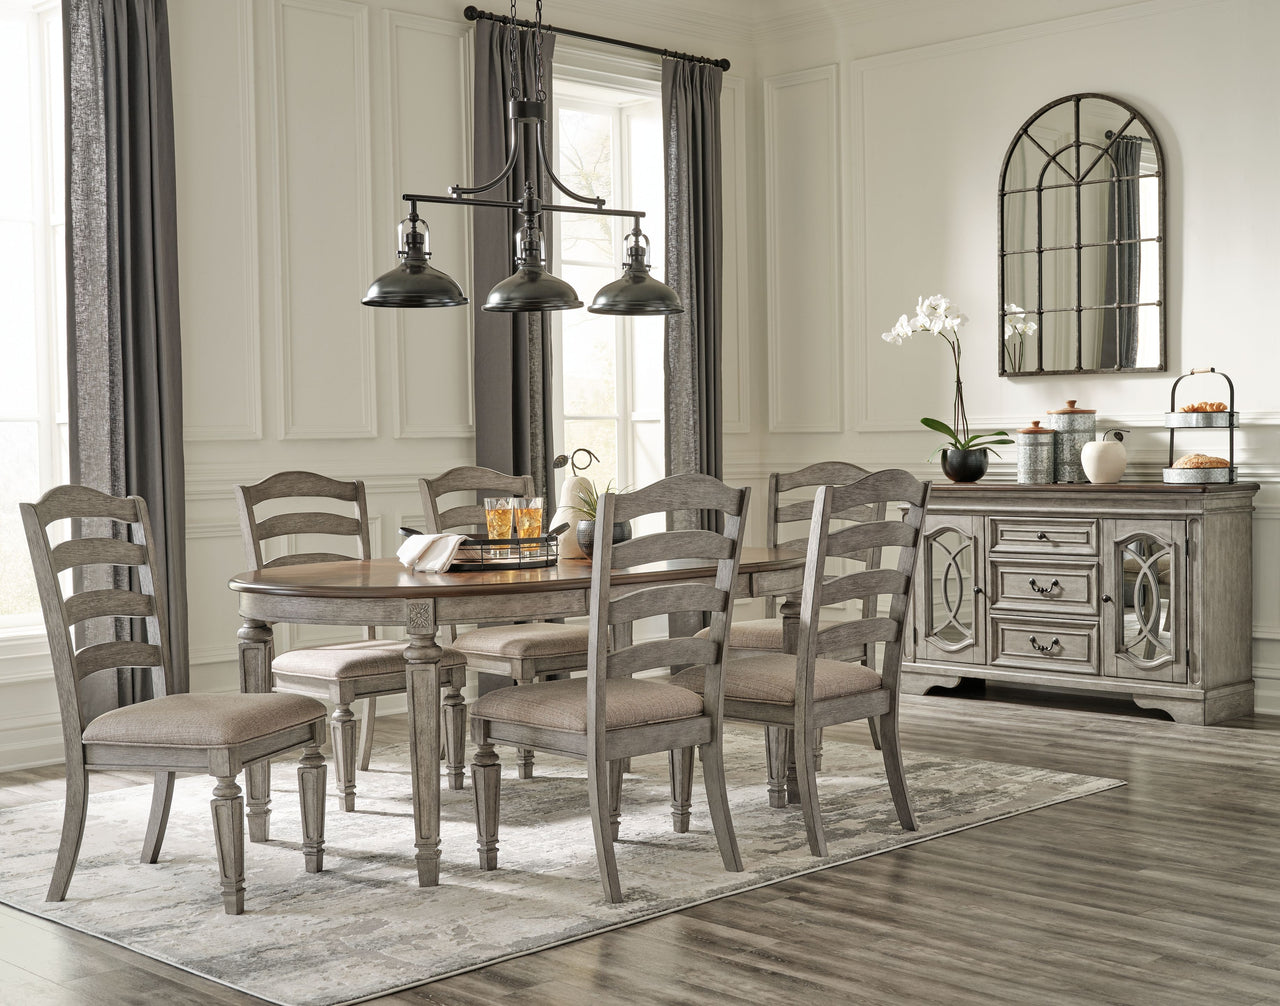 Lodenbay - Extensiontable Dining Room Set - Tony's Home Furnishings